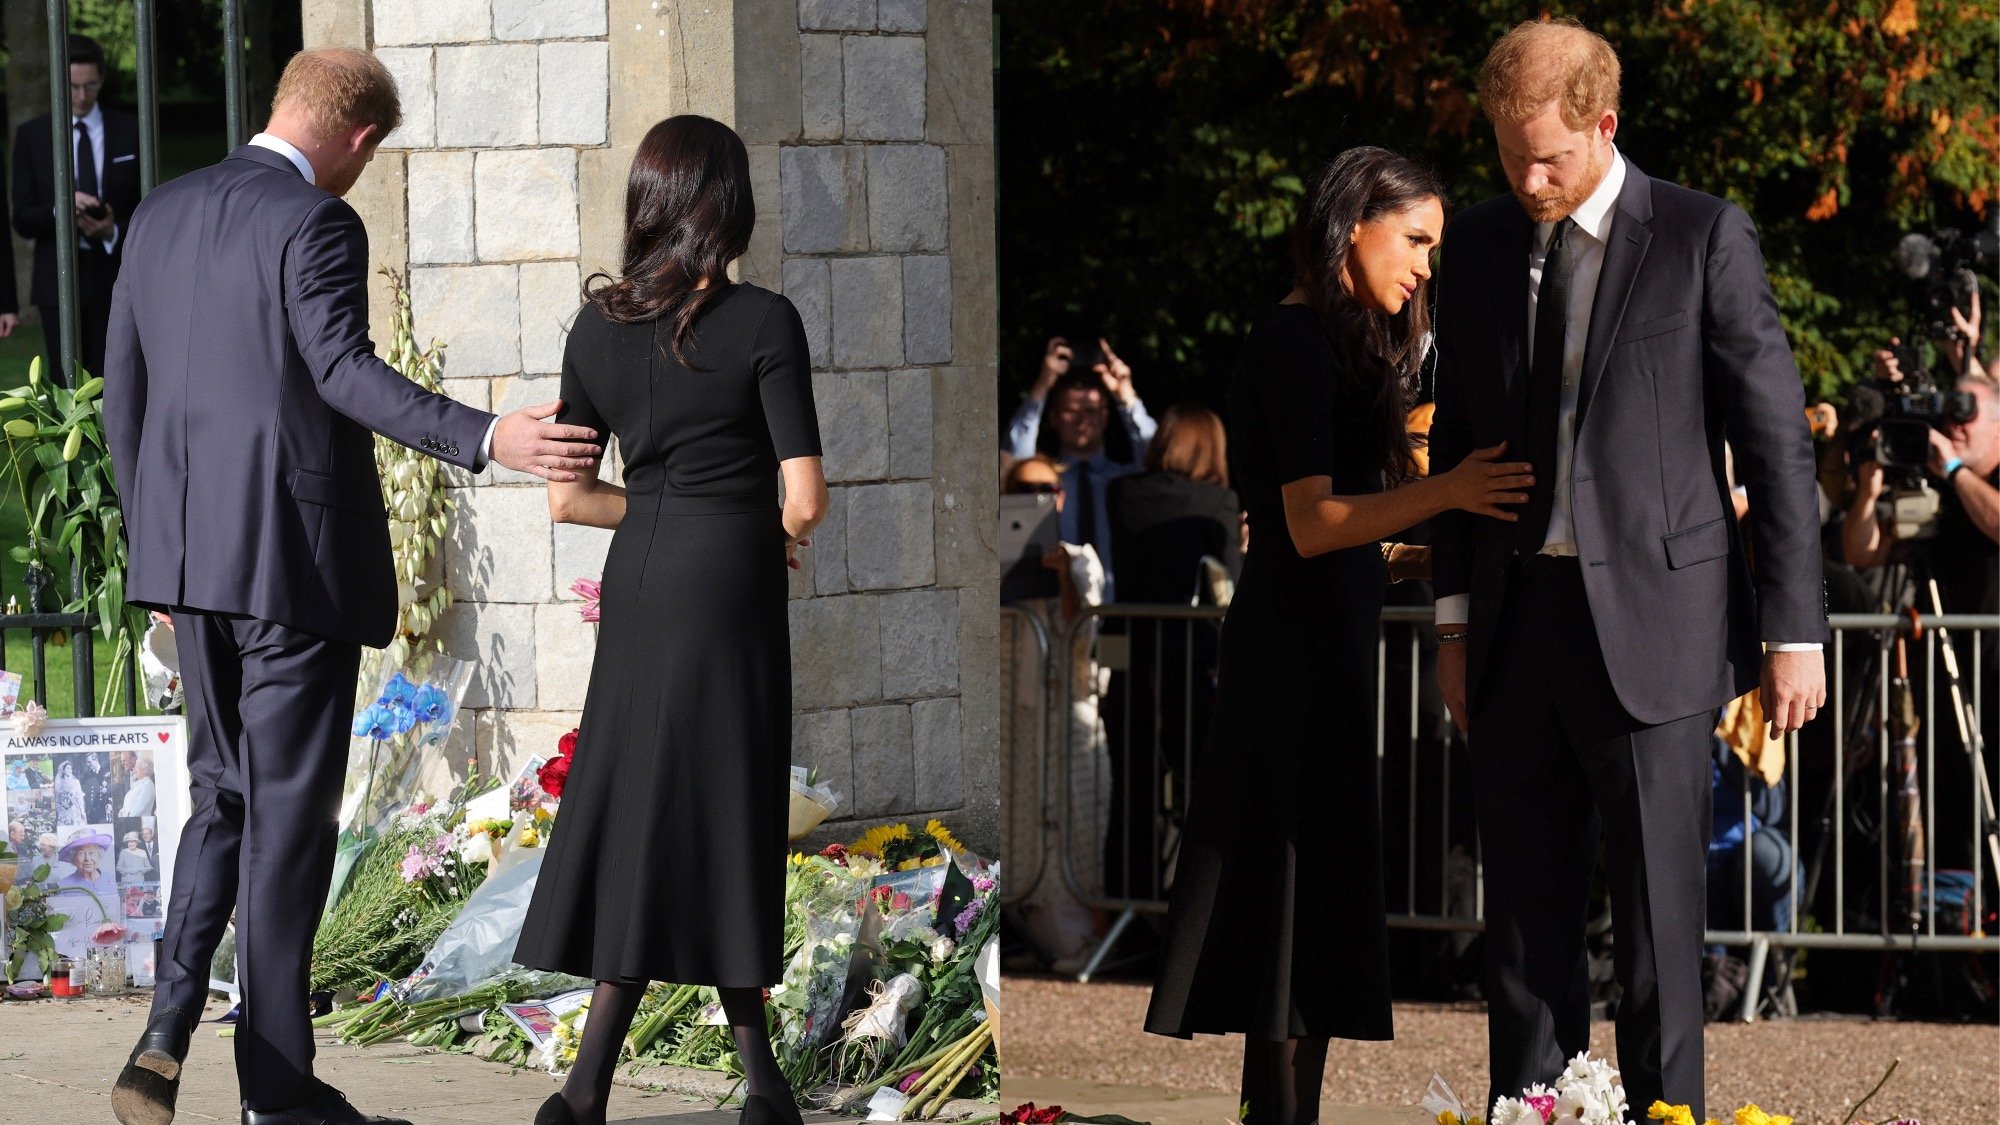 (L) Harry touches Meghan's arm (R) Meghan touches Harry's stomach